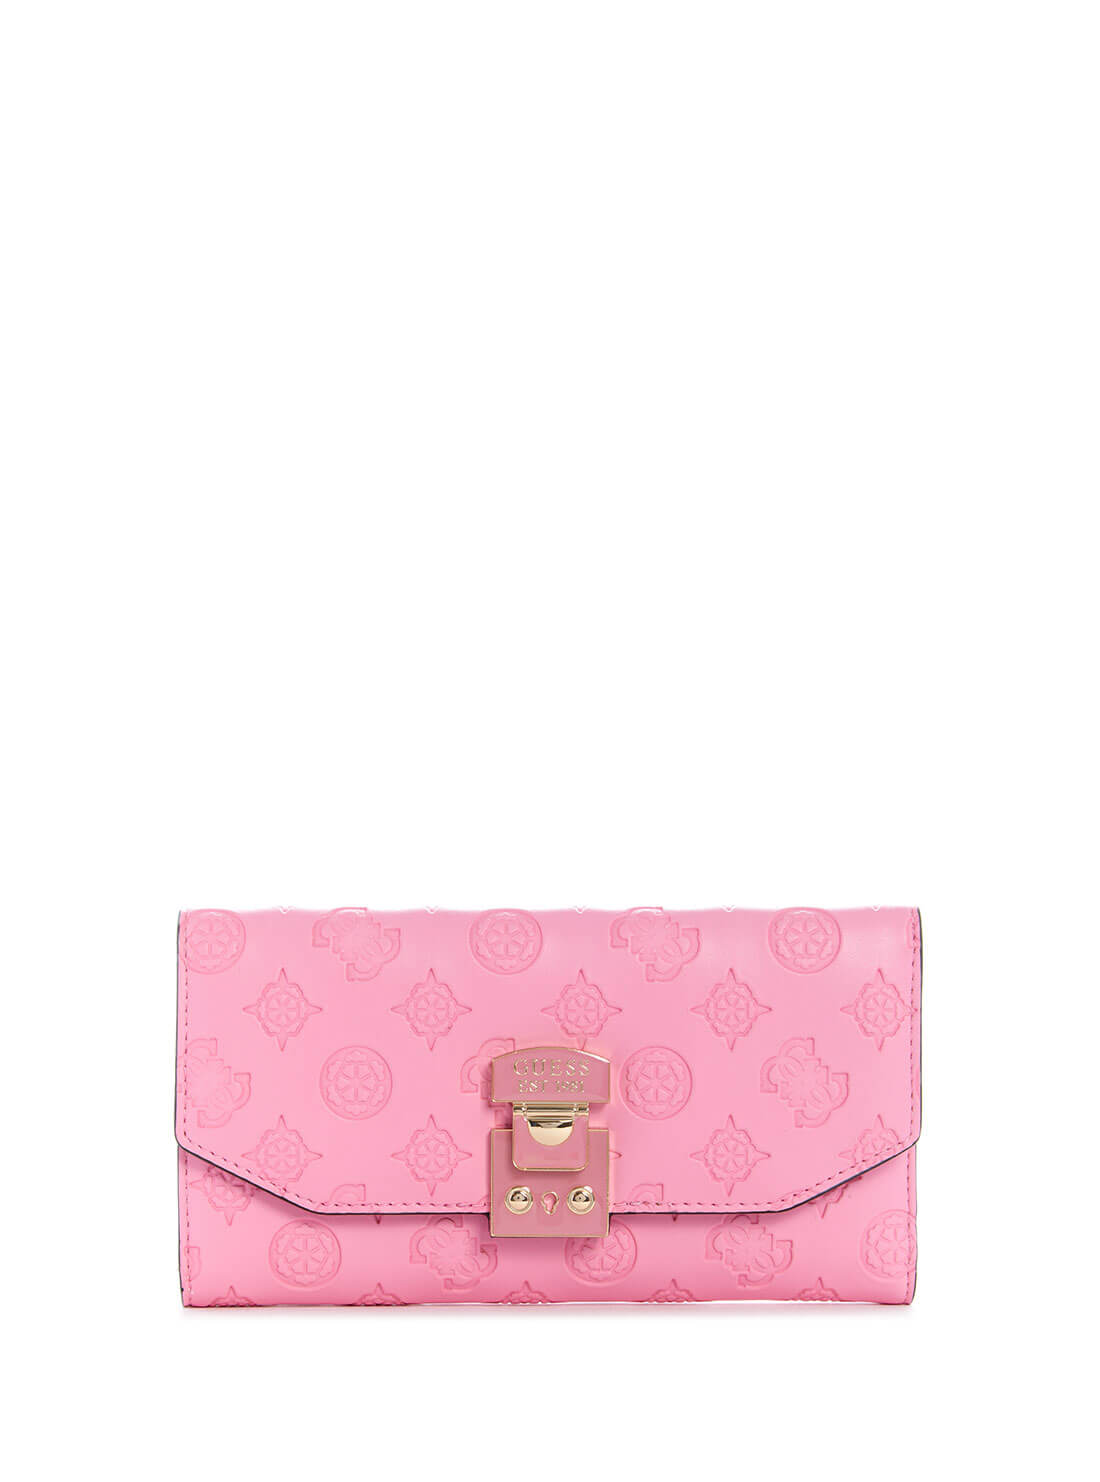 GUESS Womens  Pink Carlson Multi Clutch PG839866 Front View